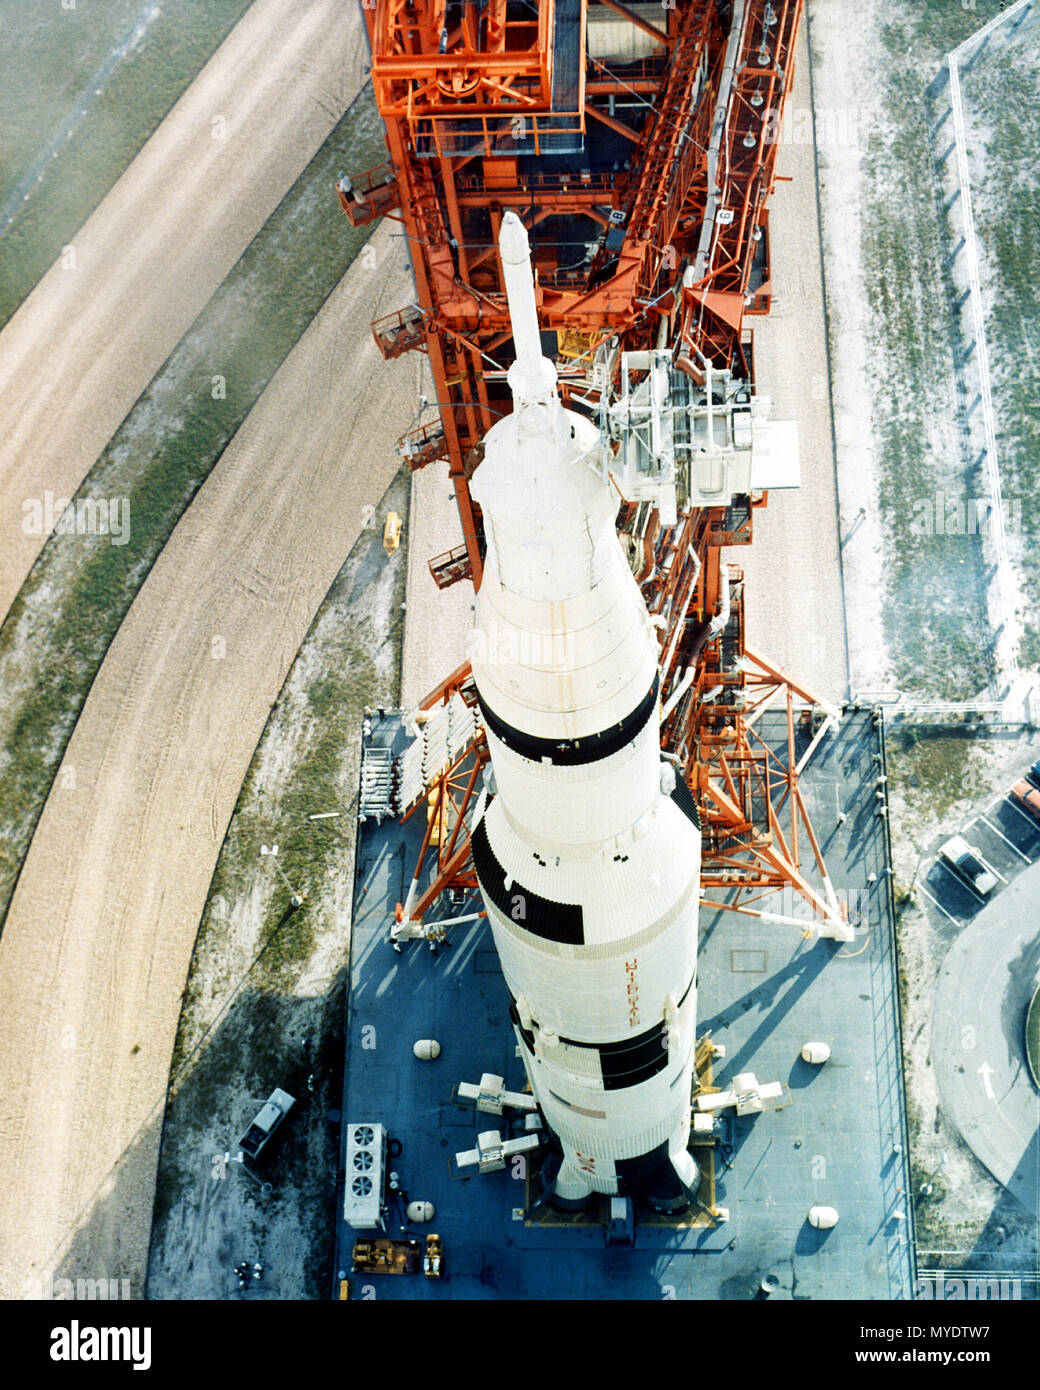 A view of the 363-foot high Saturn V launch vehicle that will carry Apollo 8 astronauts Frank Borman, James Lovell and William Anders into space. Stock Photo